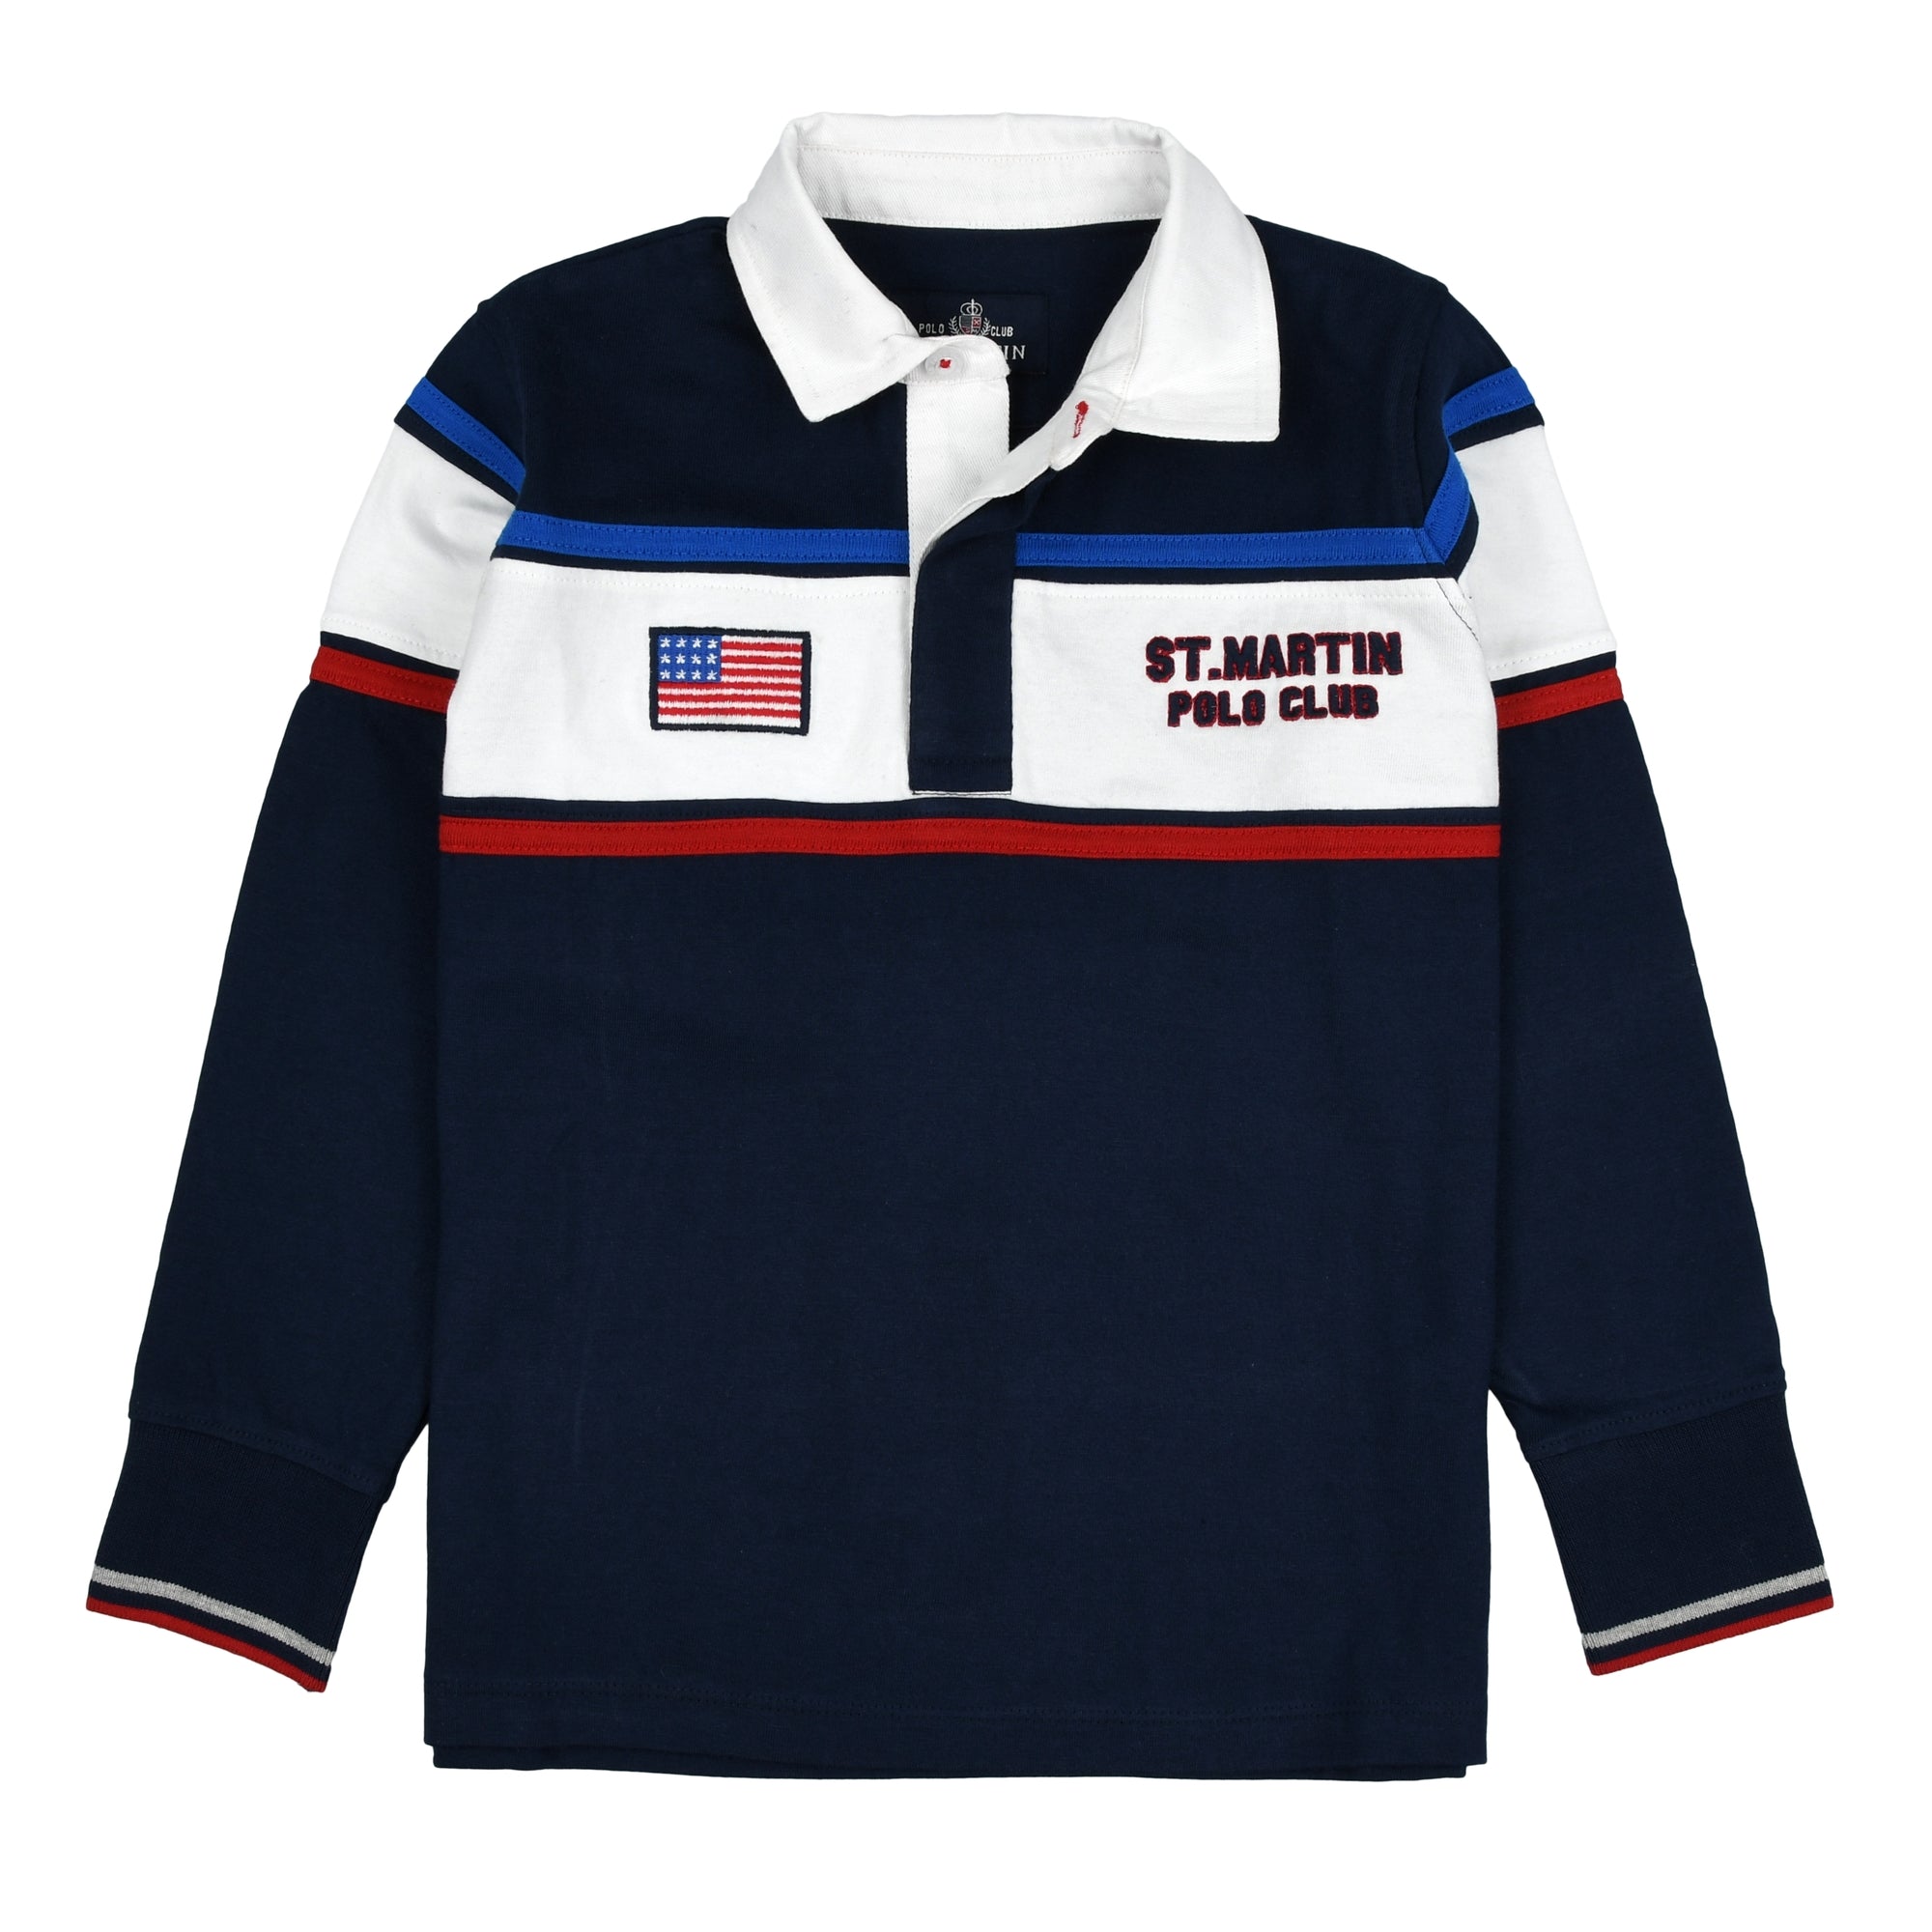 Long sleeve jersey polo shirt with band